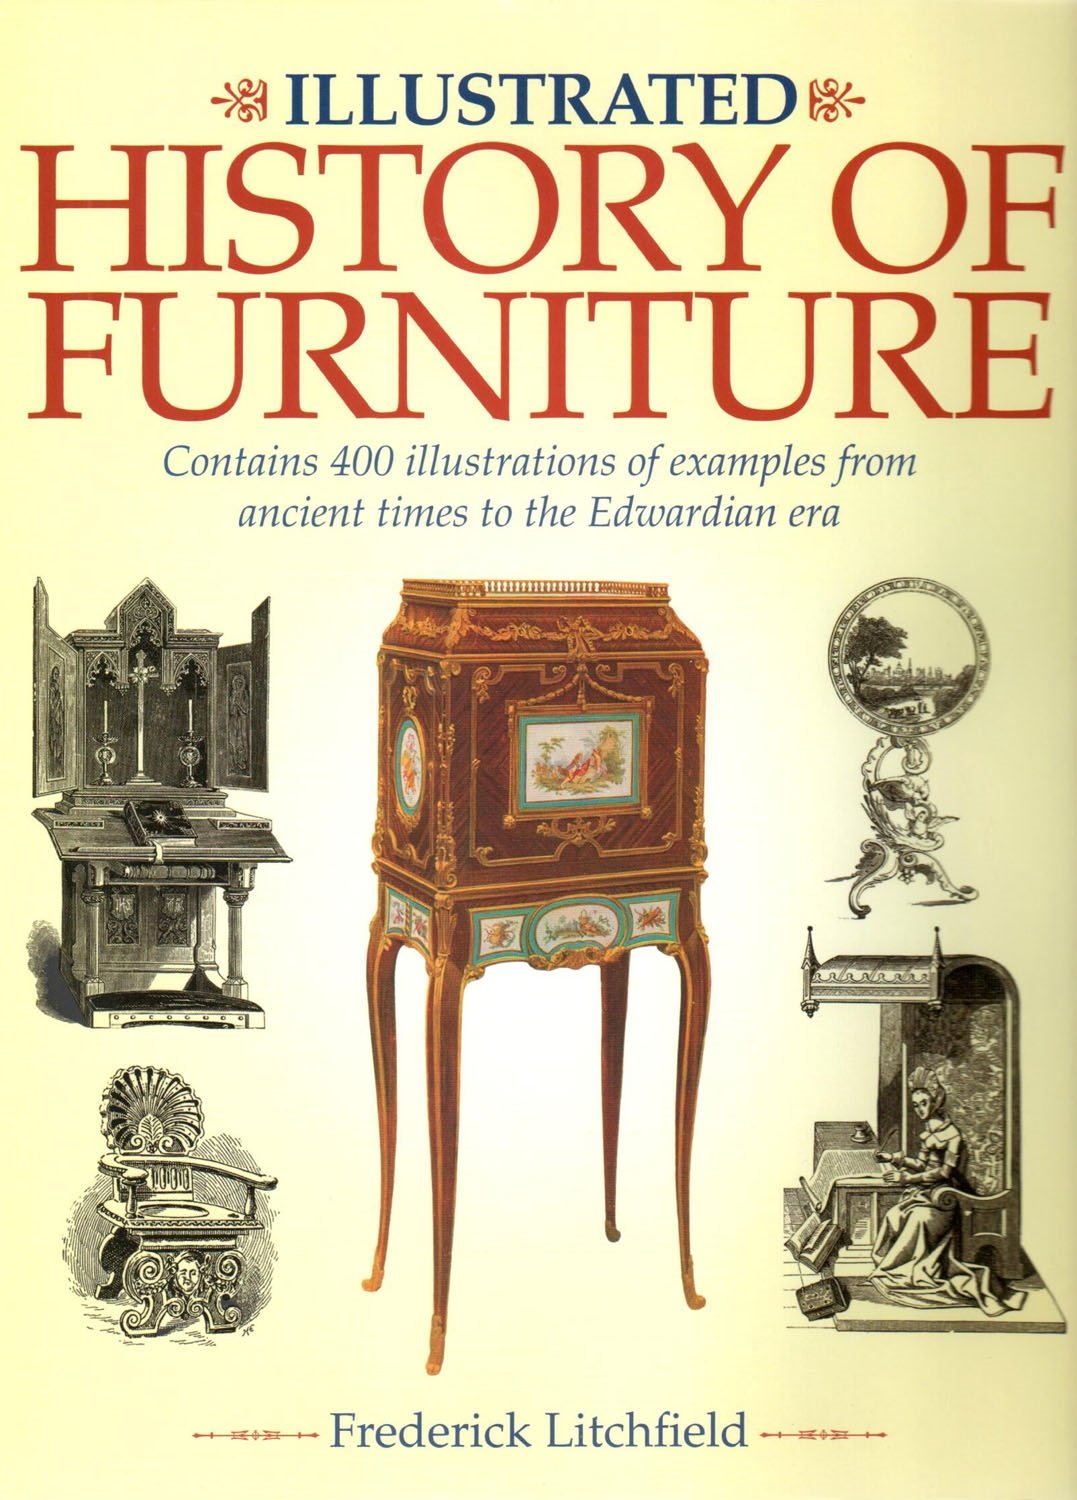 The Illustrated History of Furniture - Frederick Litchfield